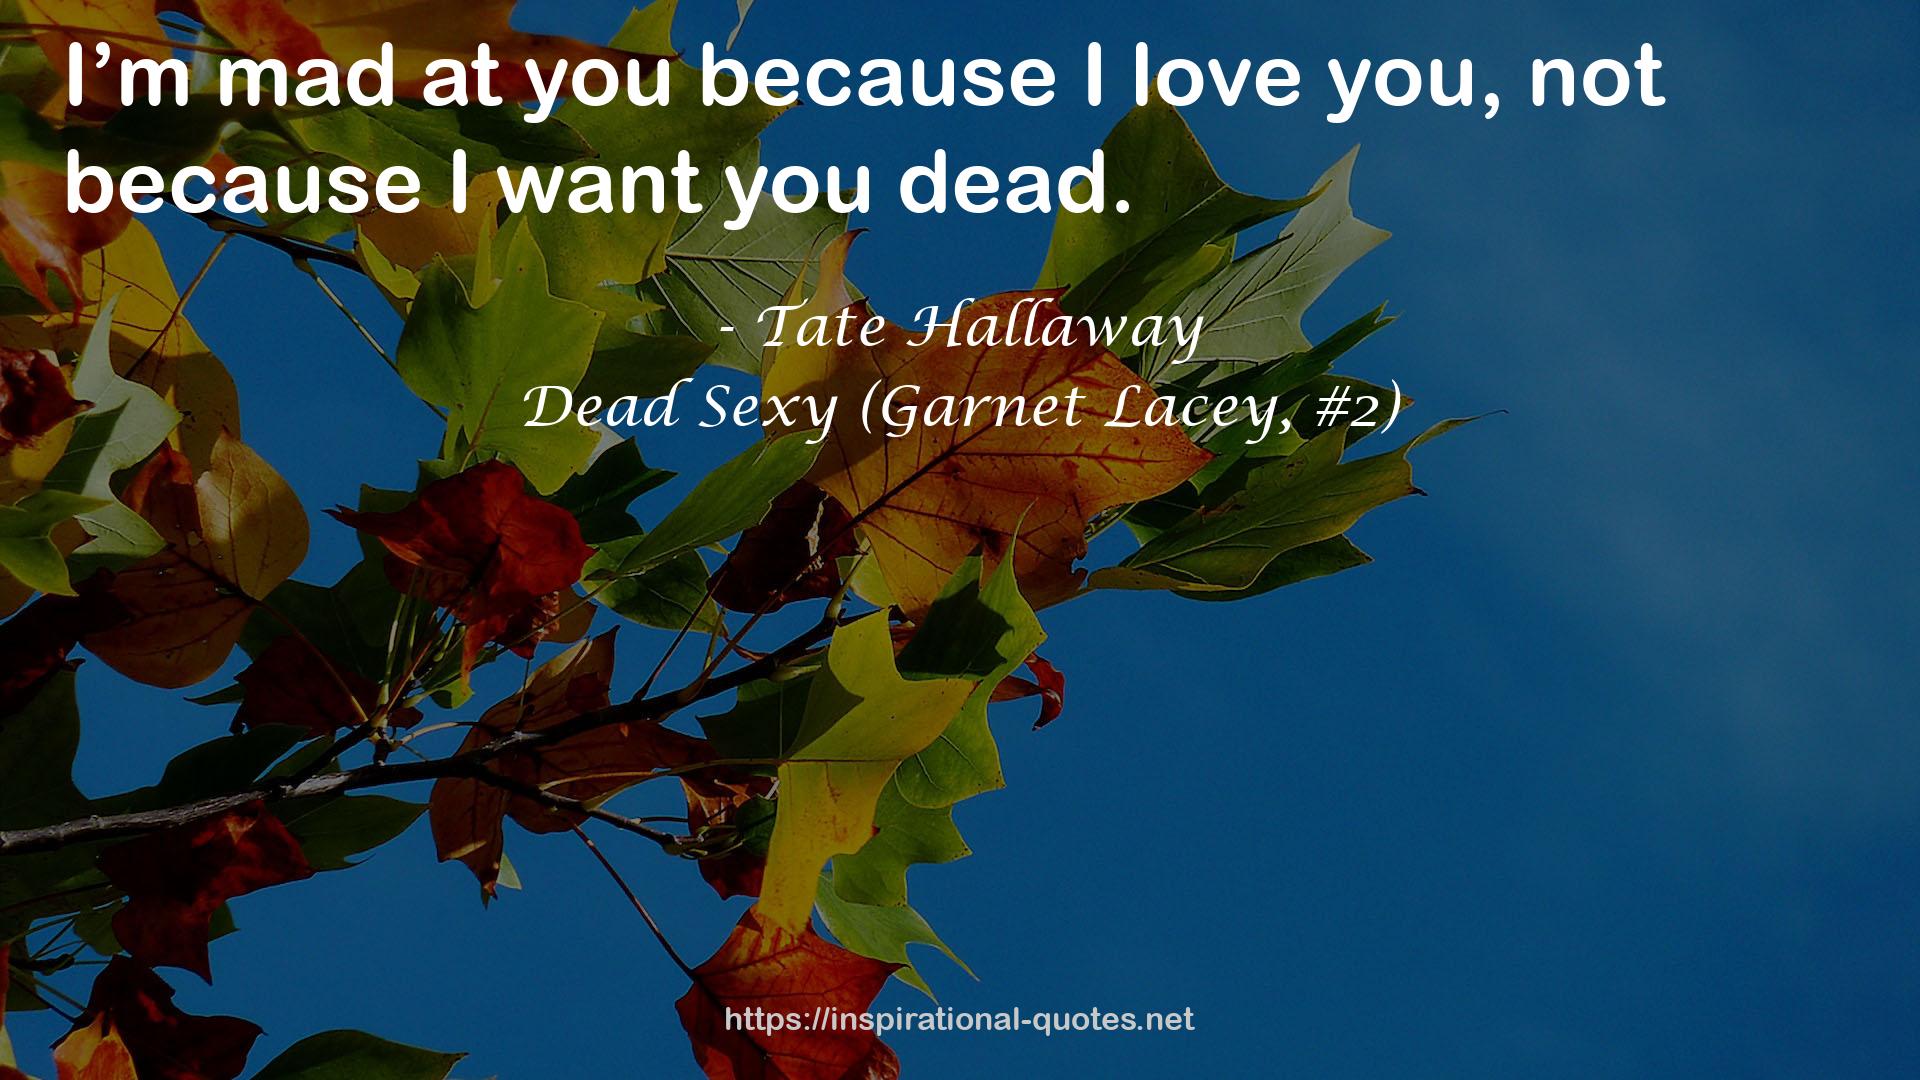 Dead Sexy (Garnet Lacey, #2) QUOTES